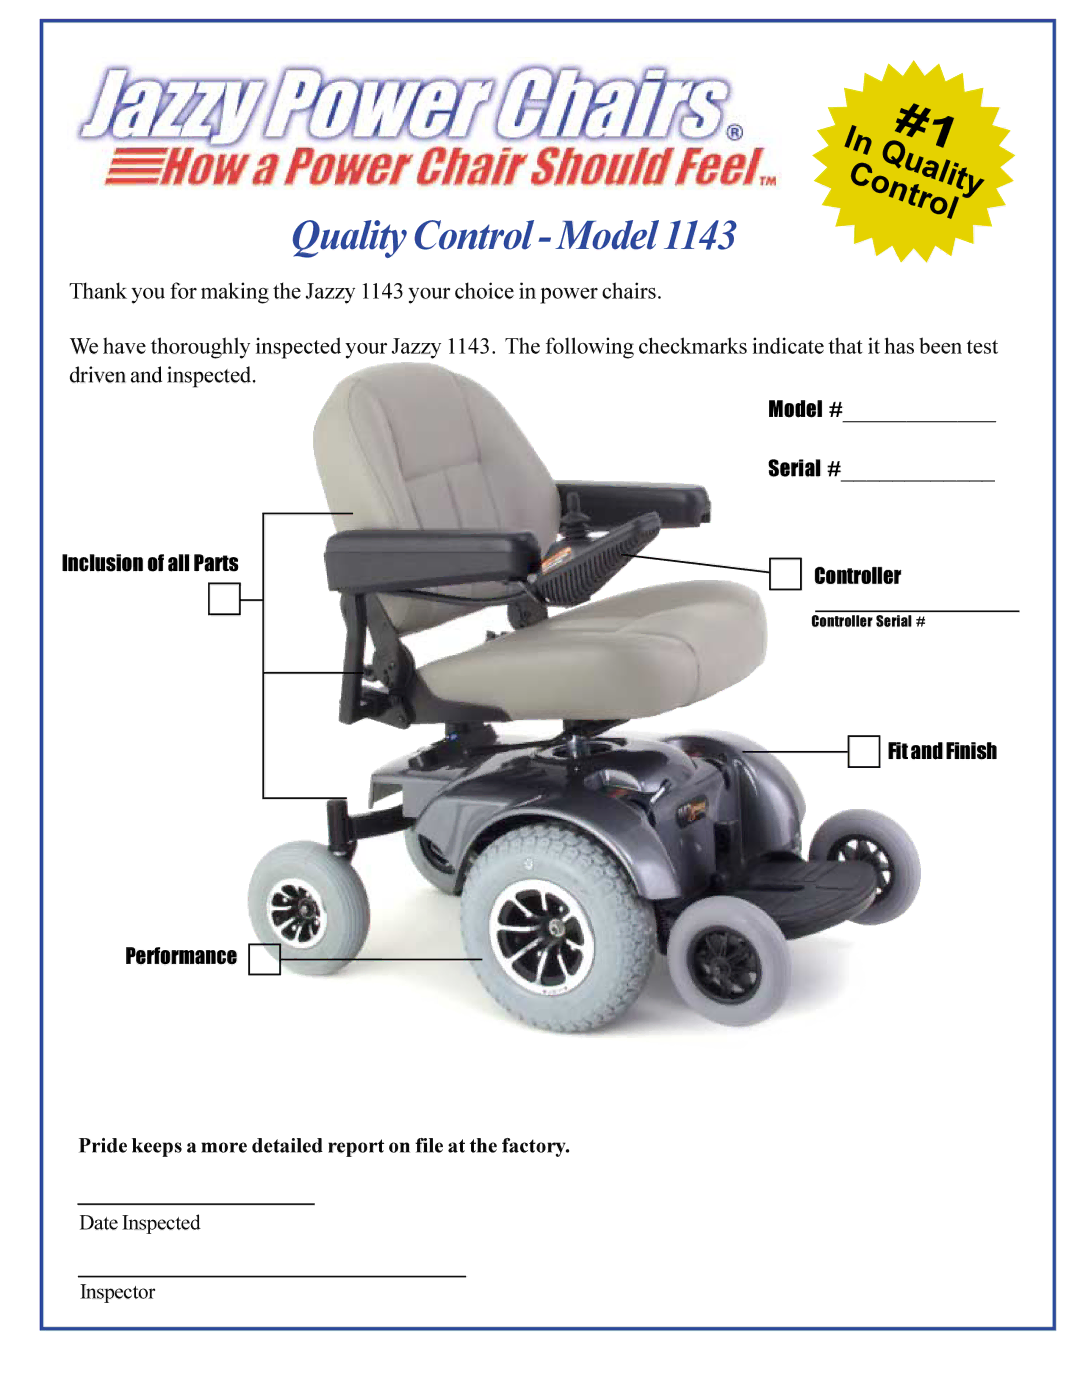 Pride Mobility Jazzy 1143 owner manual Quality Control Model, Pride keeps a more detailed report on file at the factory 